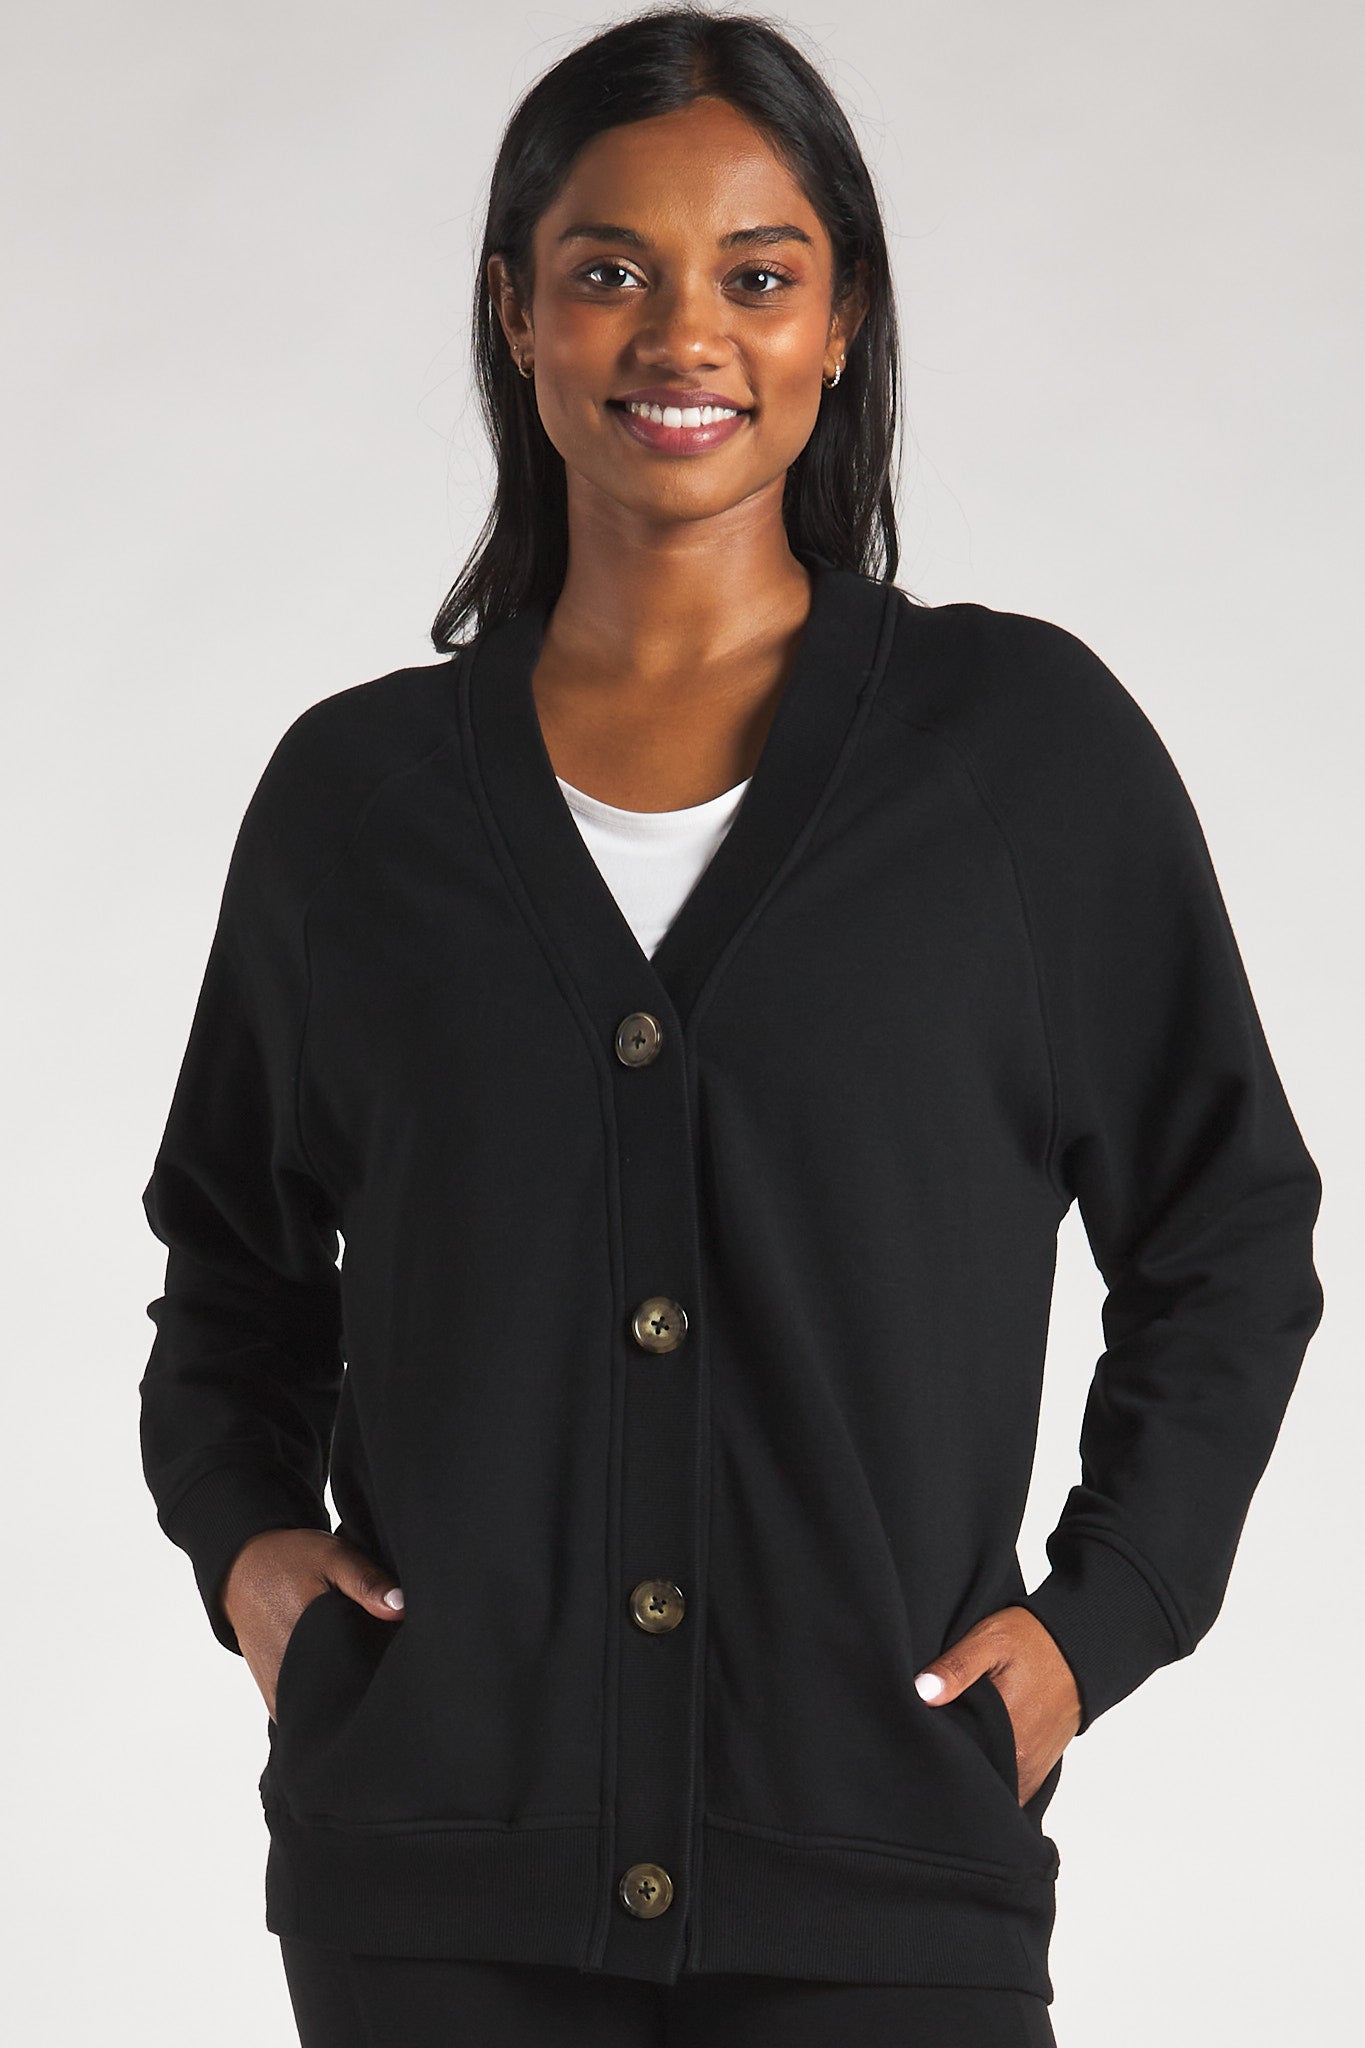 Women’s soft and luxurious bamboo cardigan sweater in the colour Black made by Terrera.